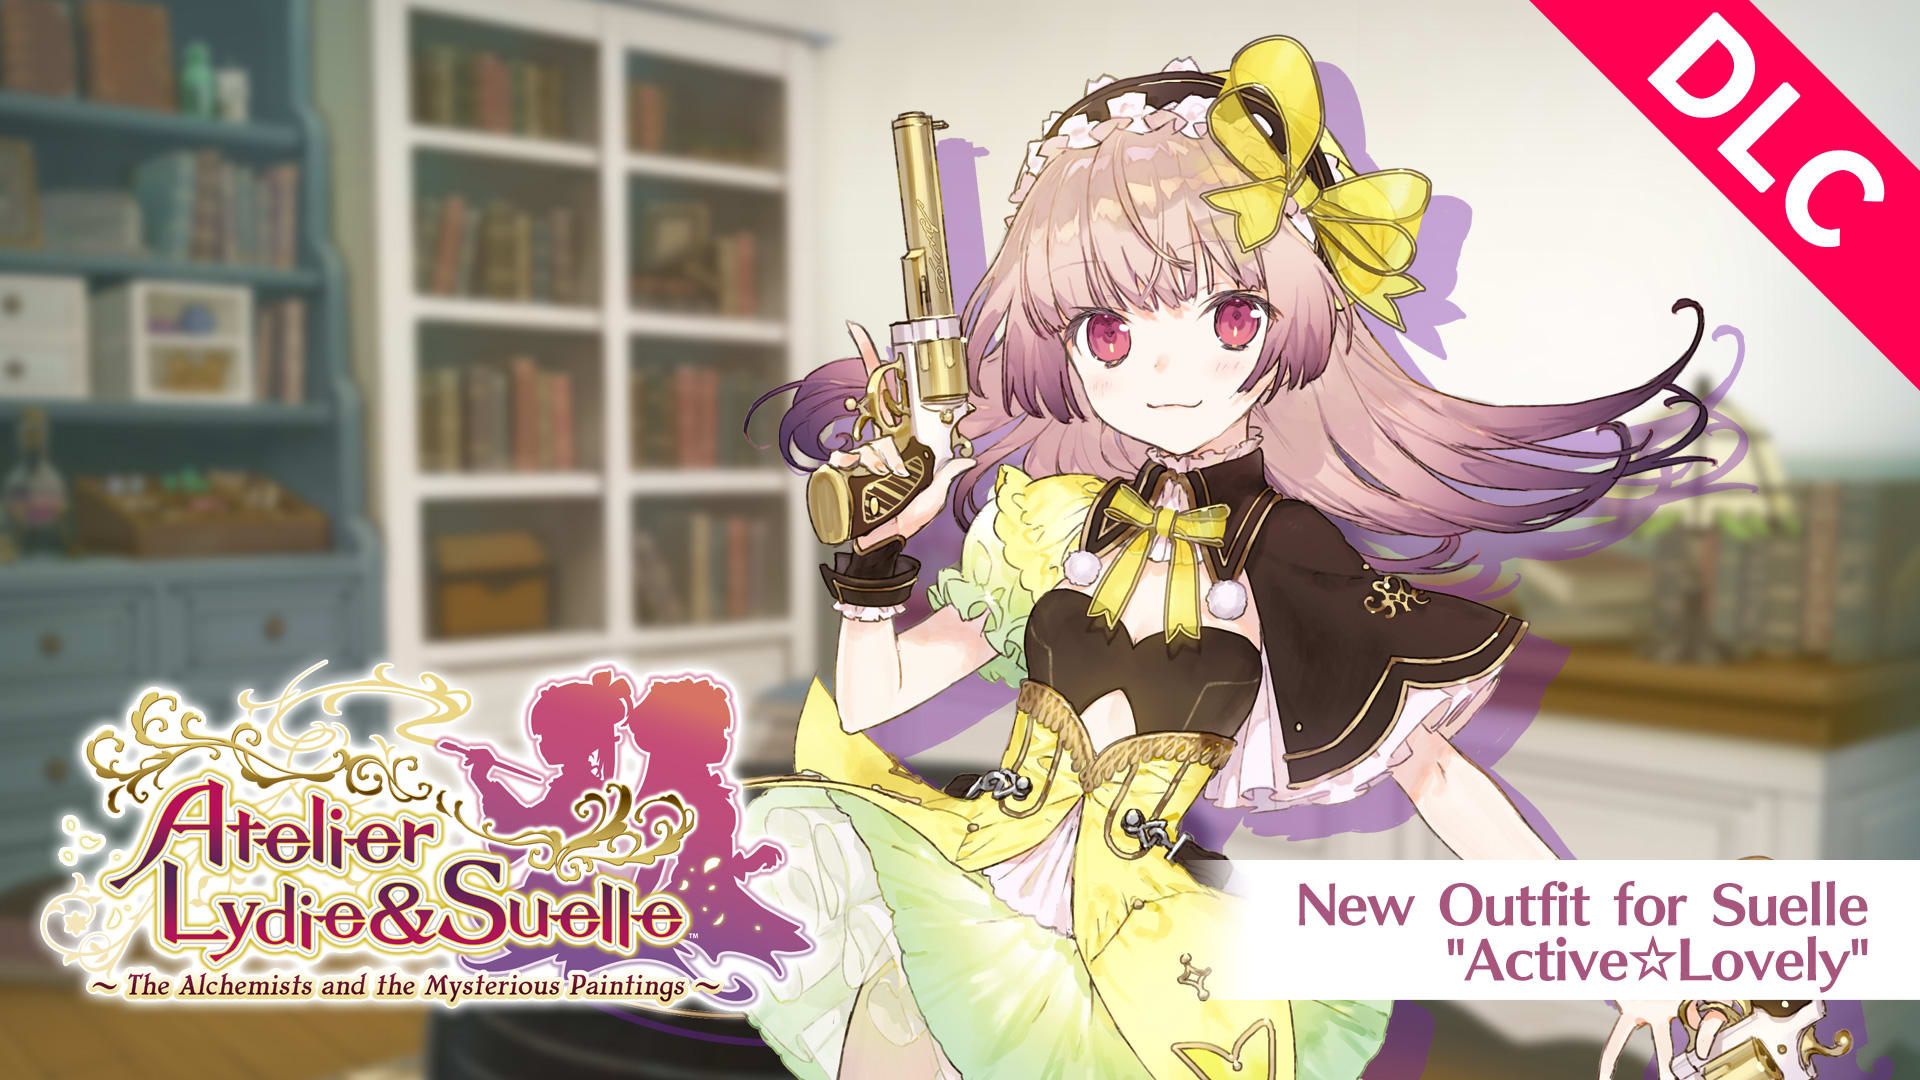 Atelier Lydie & Suelle: New Outfit for Suelle "Active☆Lovely"